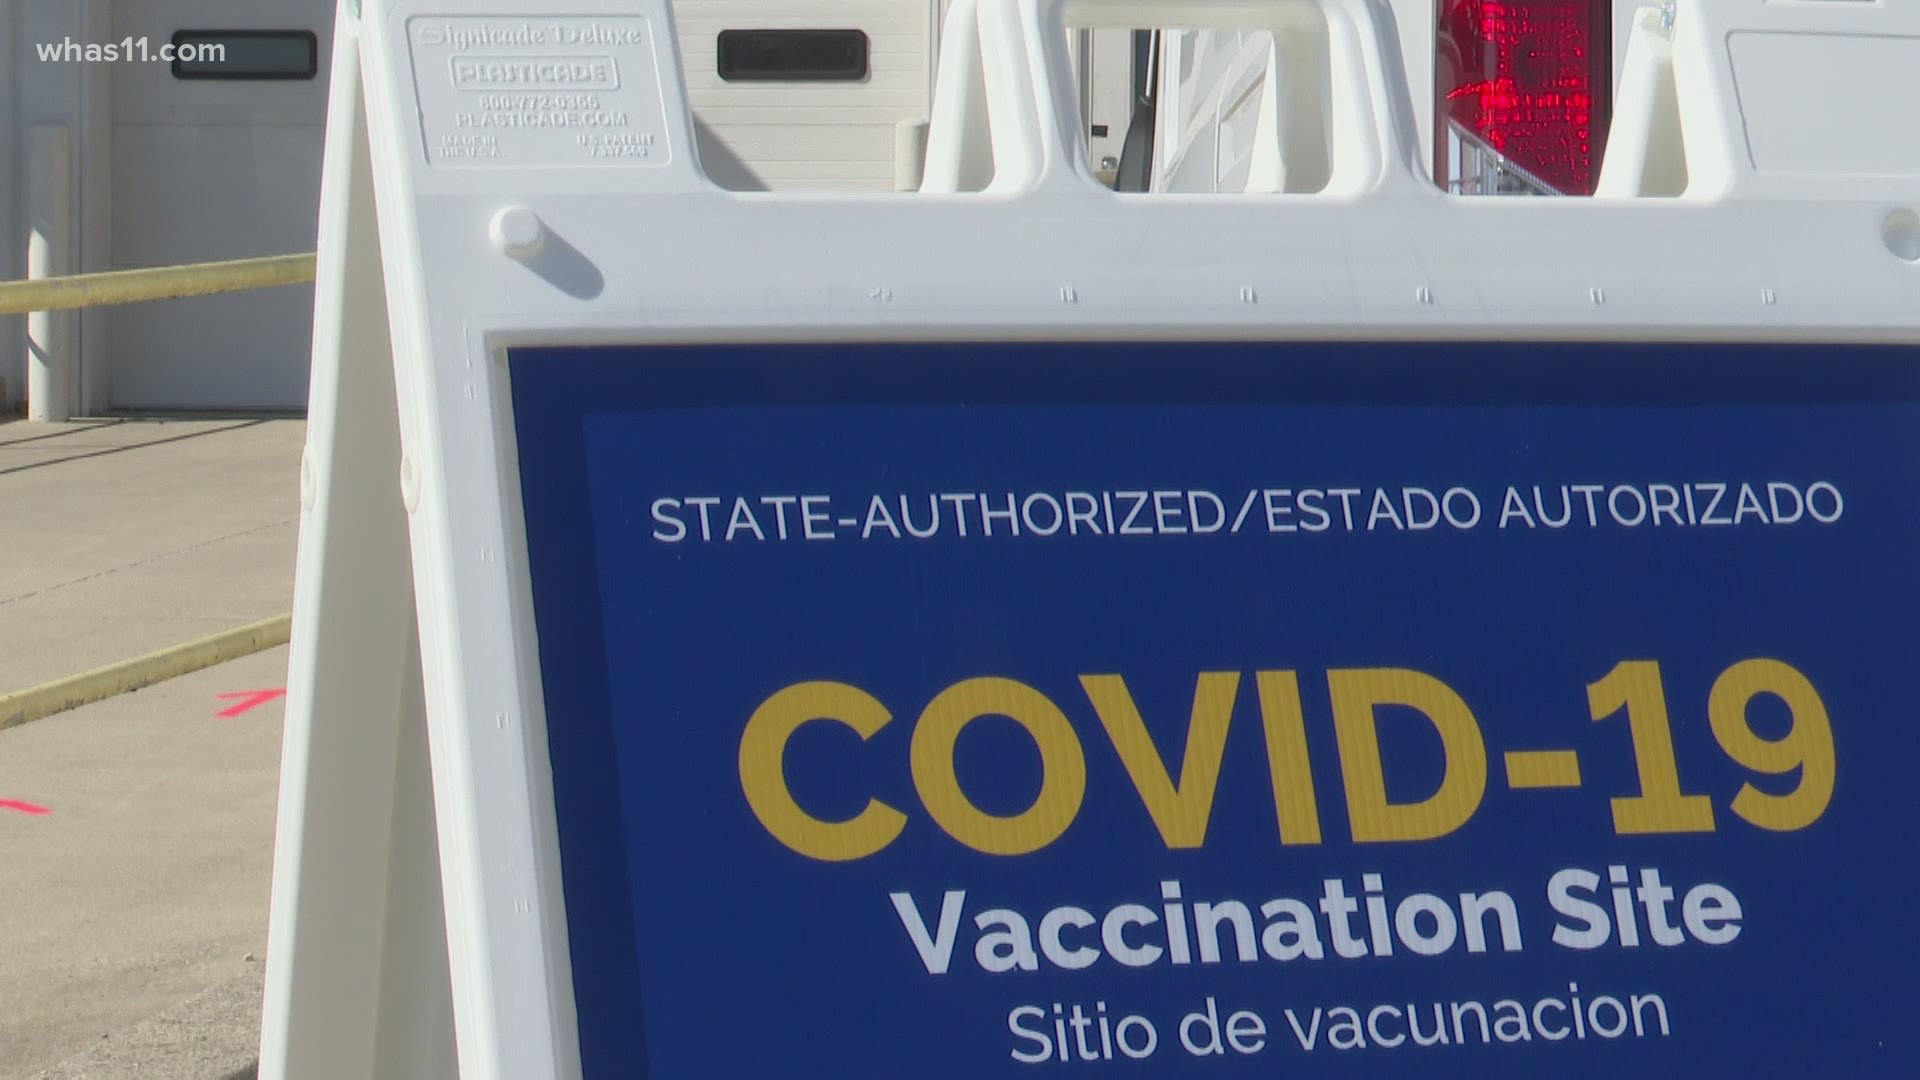 The state placed each mobile site in a county where nearly all vaccine appointments were booked for weeks.